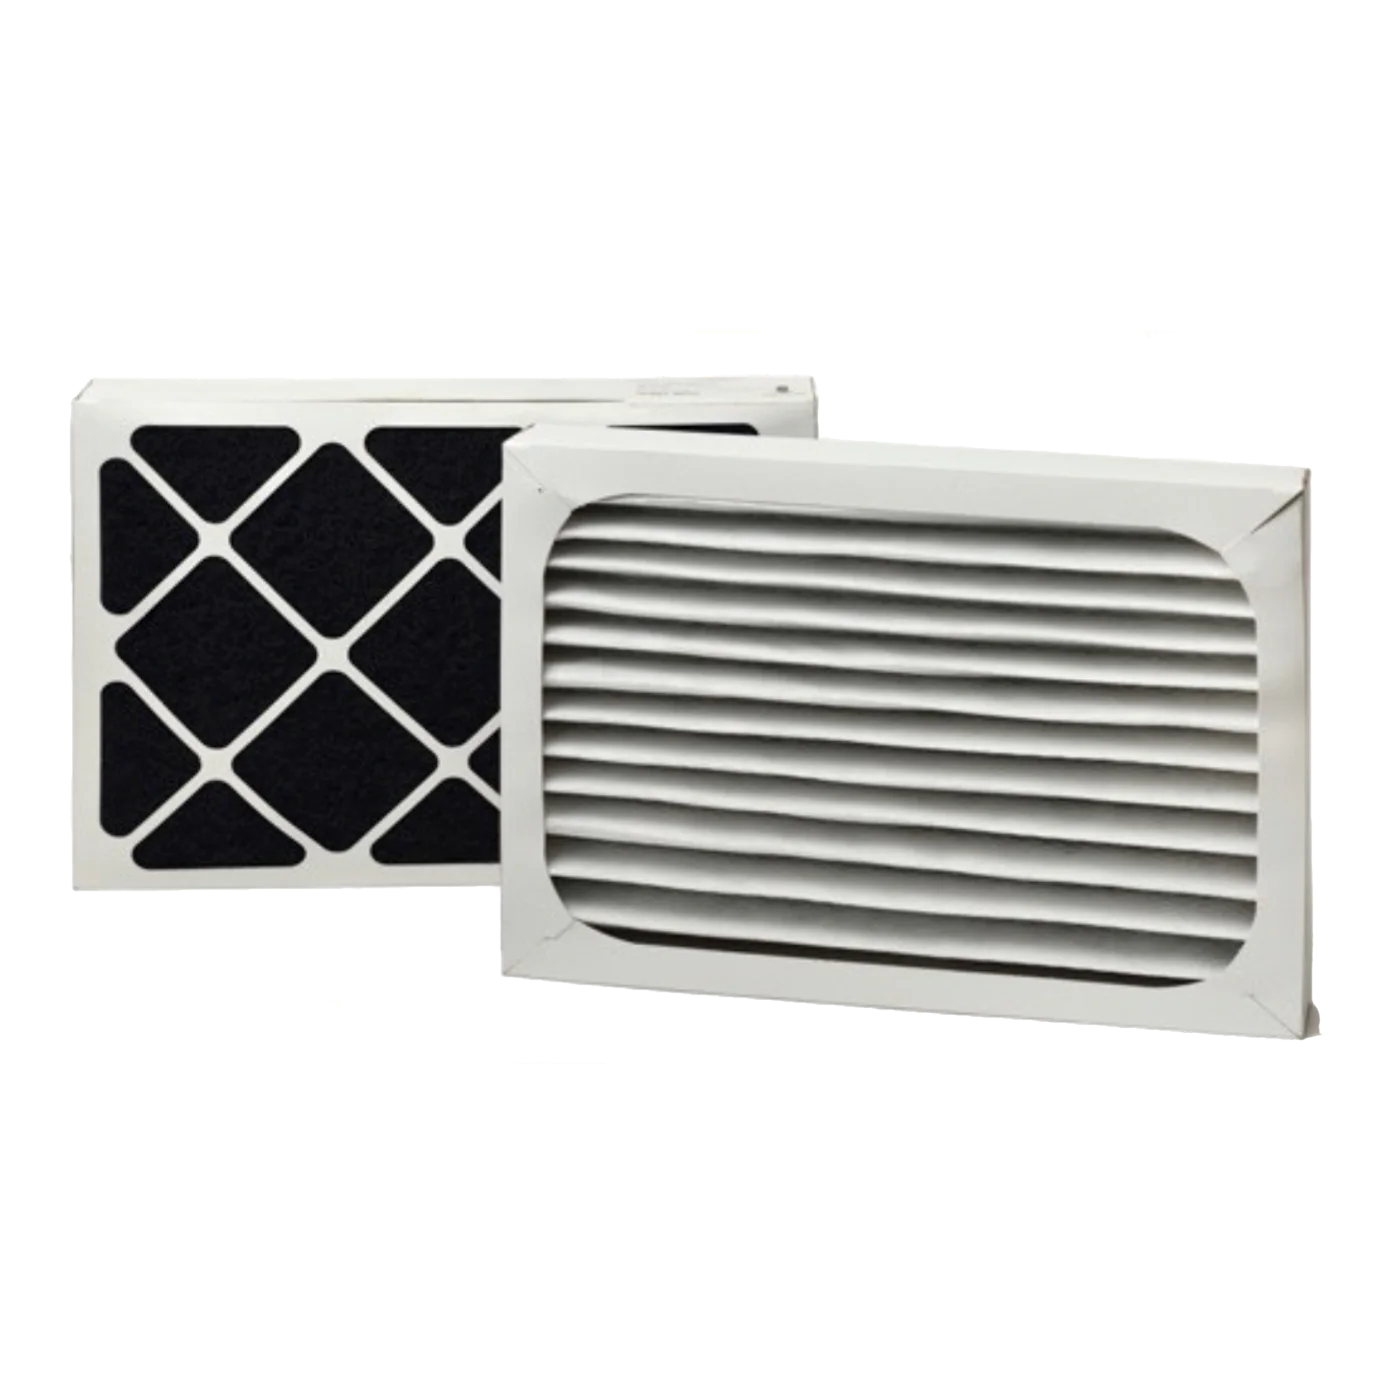 SolaceAir 300 Annual Prefilter Replacement Kit (2 pack)